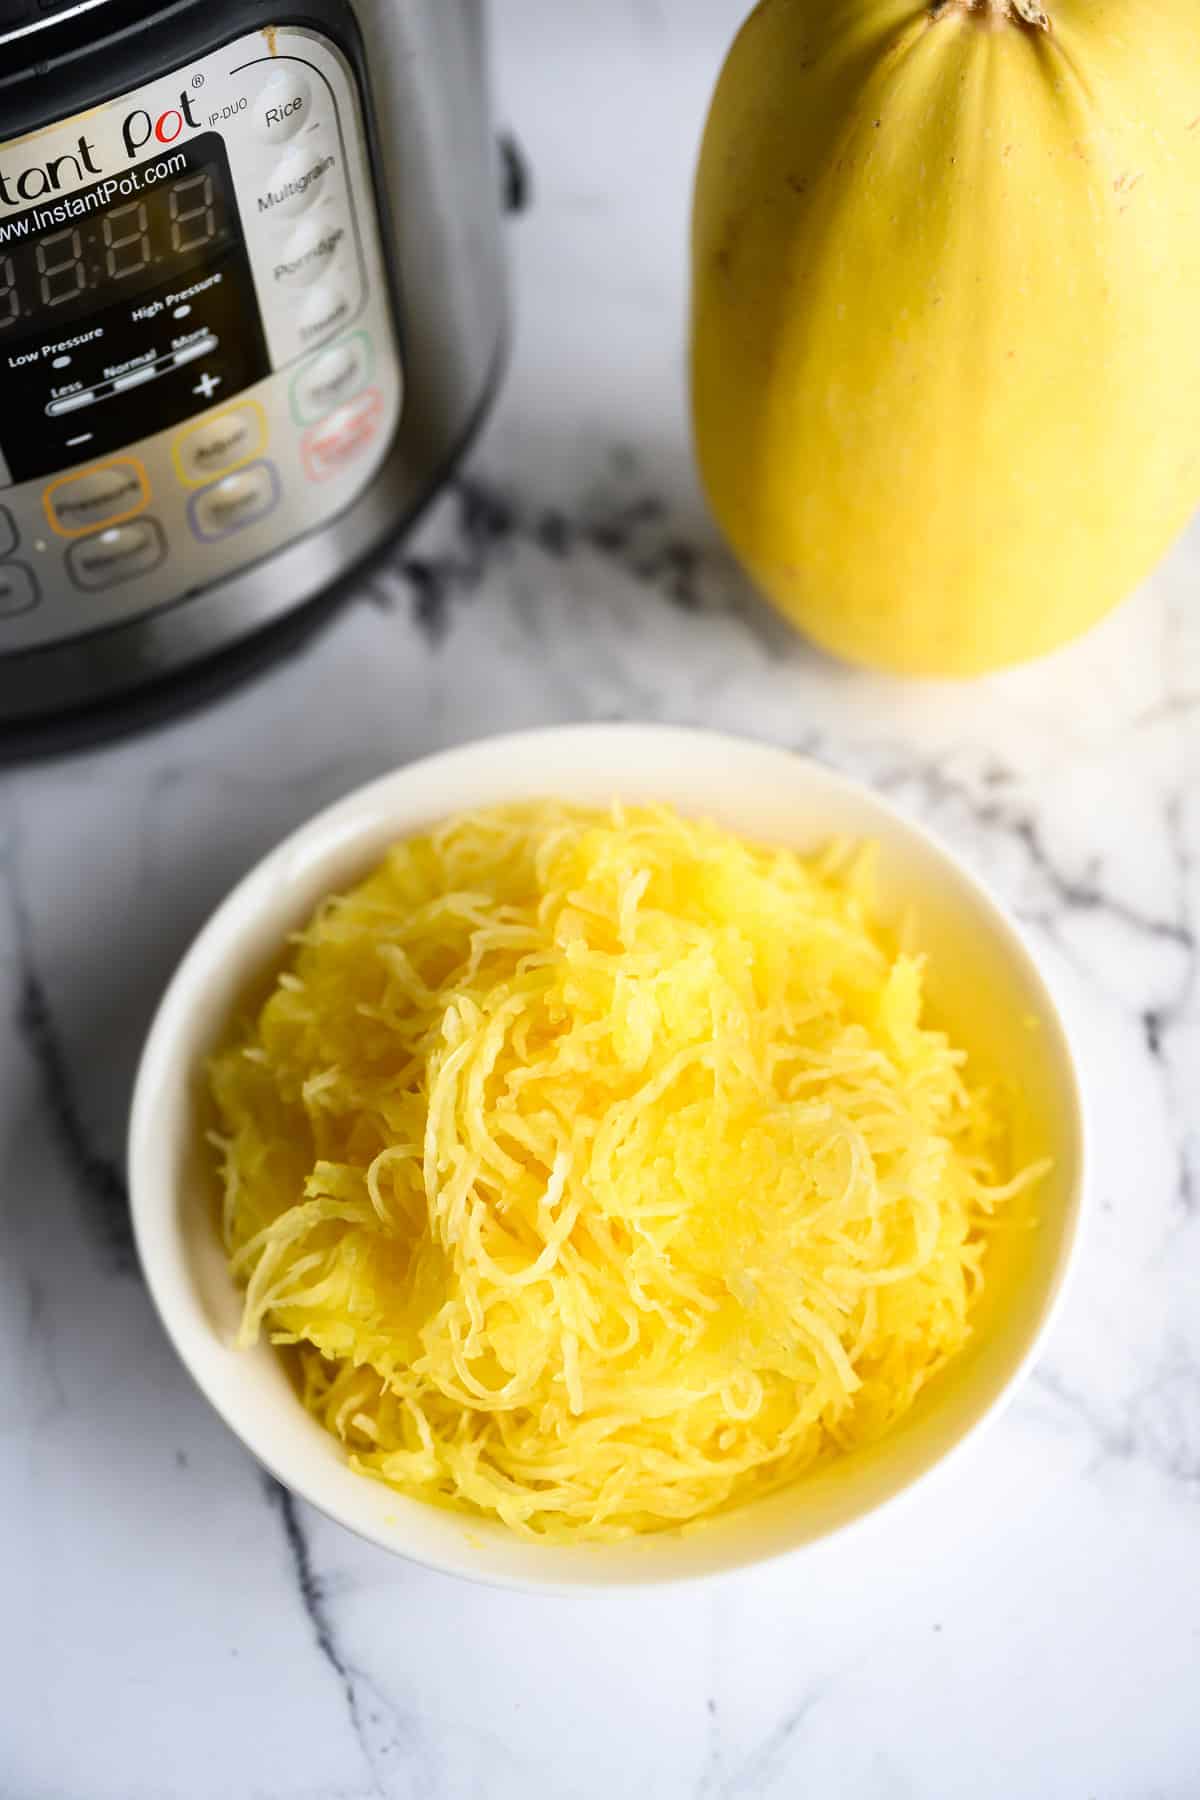 Instant pot next to a whole spaghetti squash and a bowl full of cooked spaghetti squash noodles